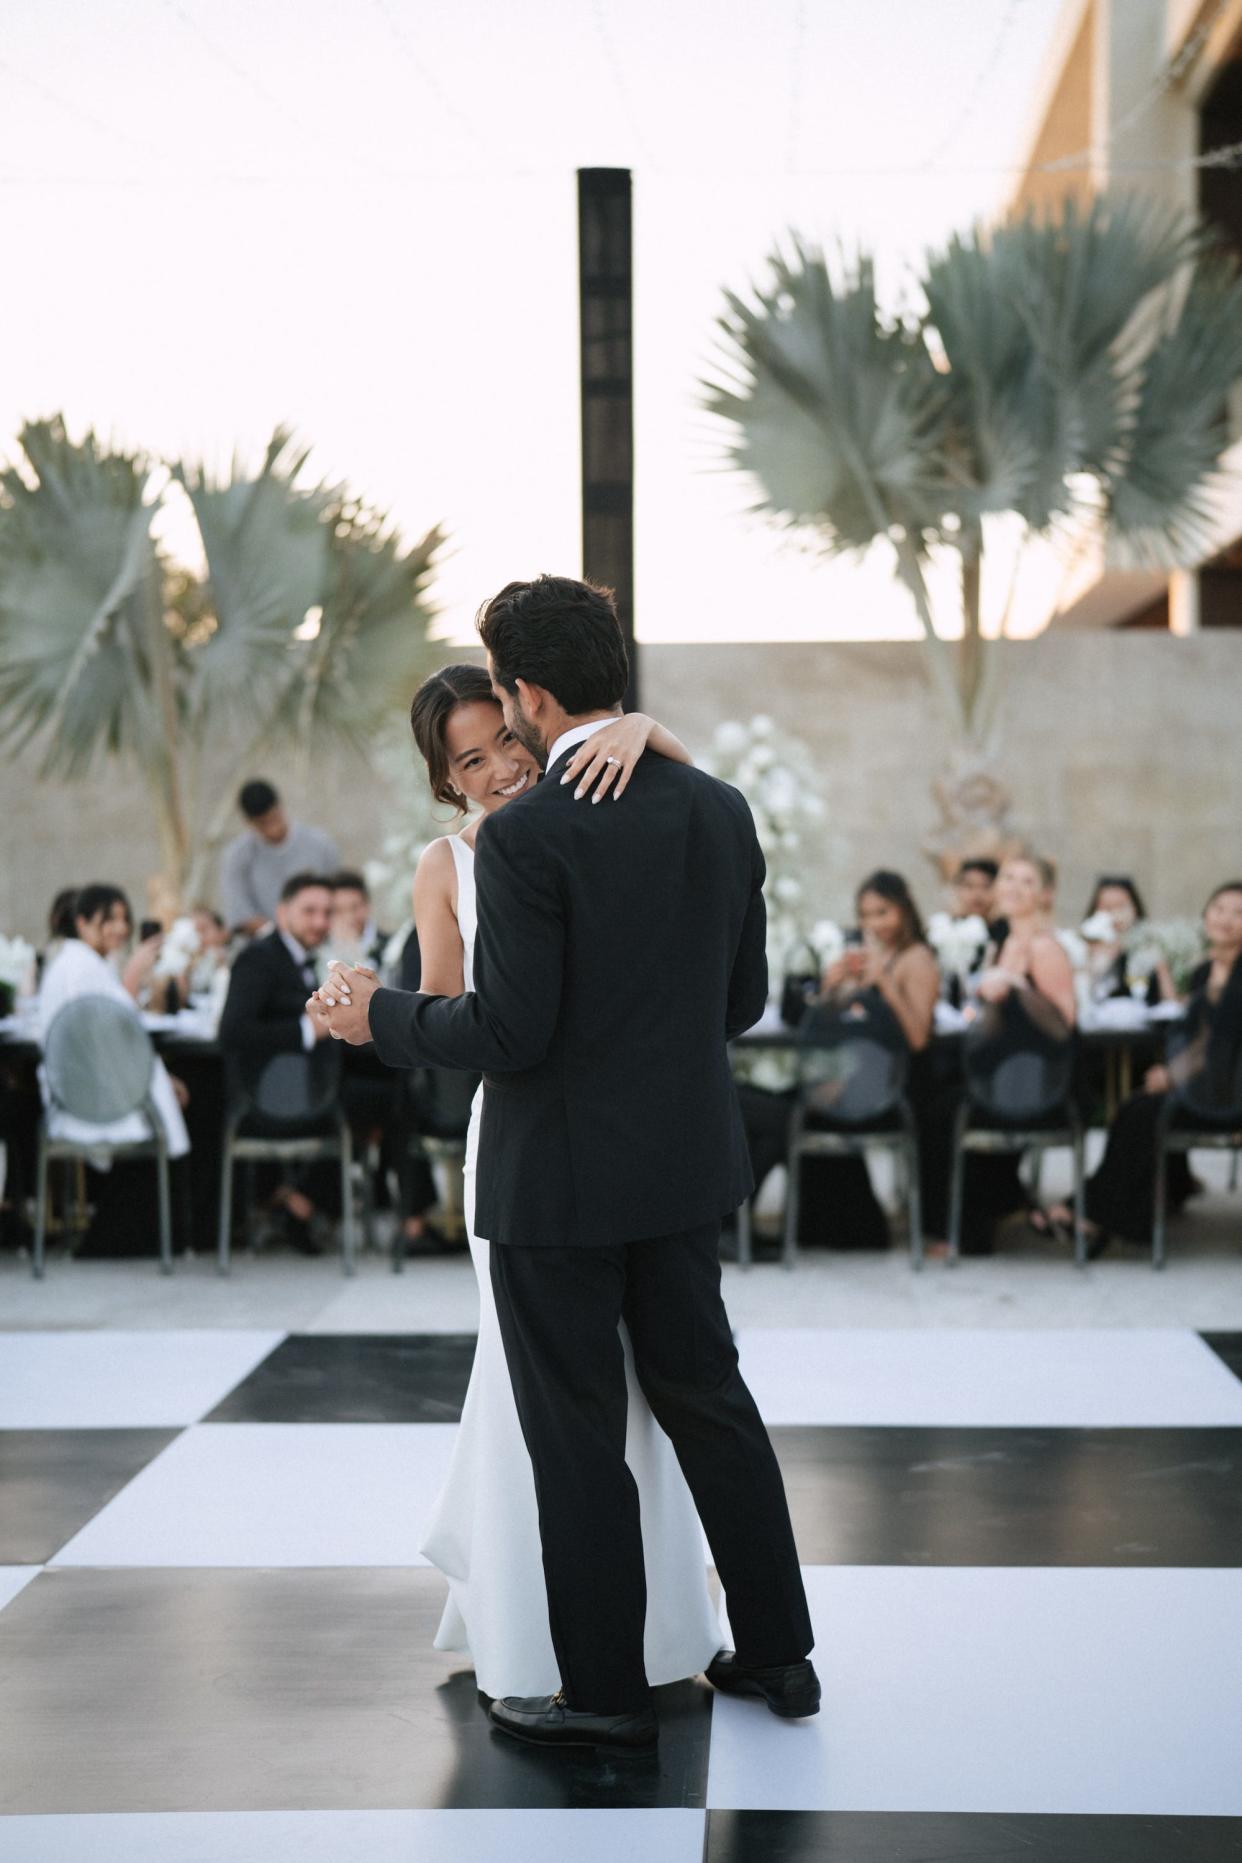 A bride laughs as she shares a first dance with her groom on a black and white dance floor.